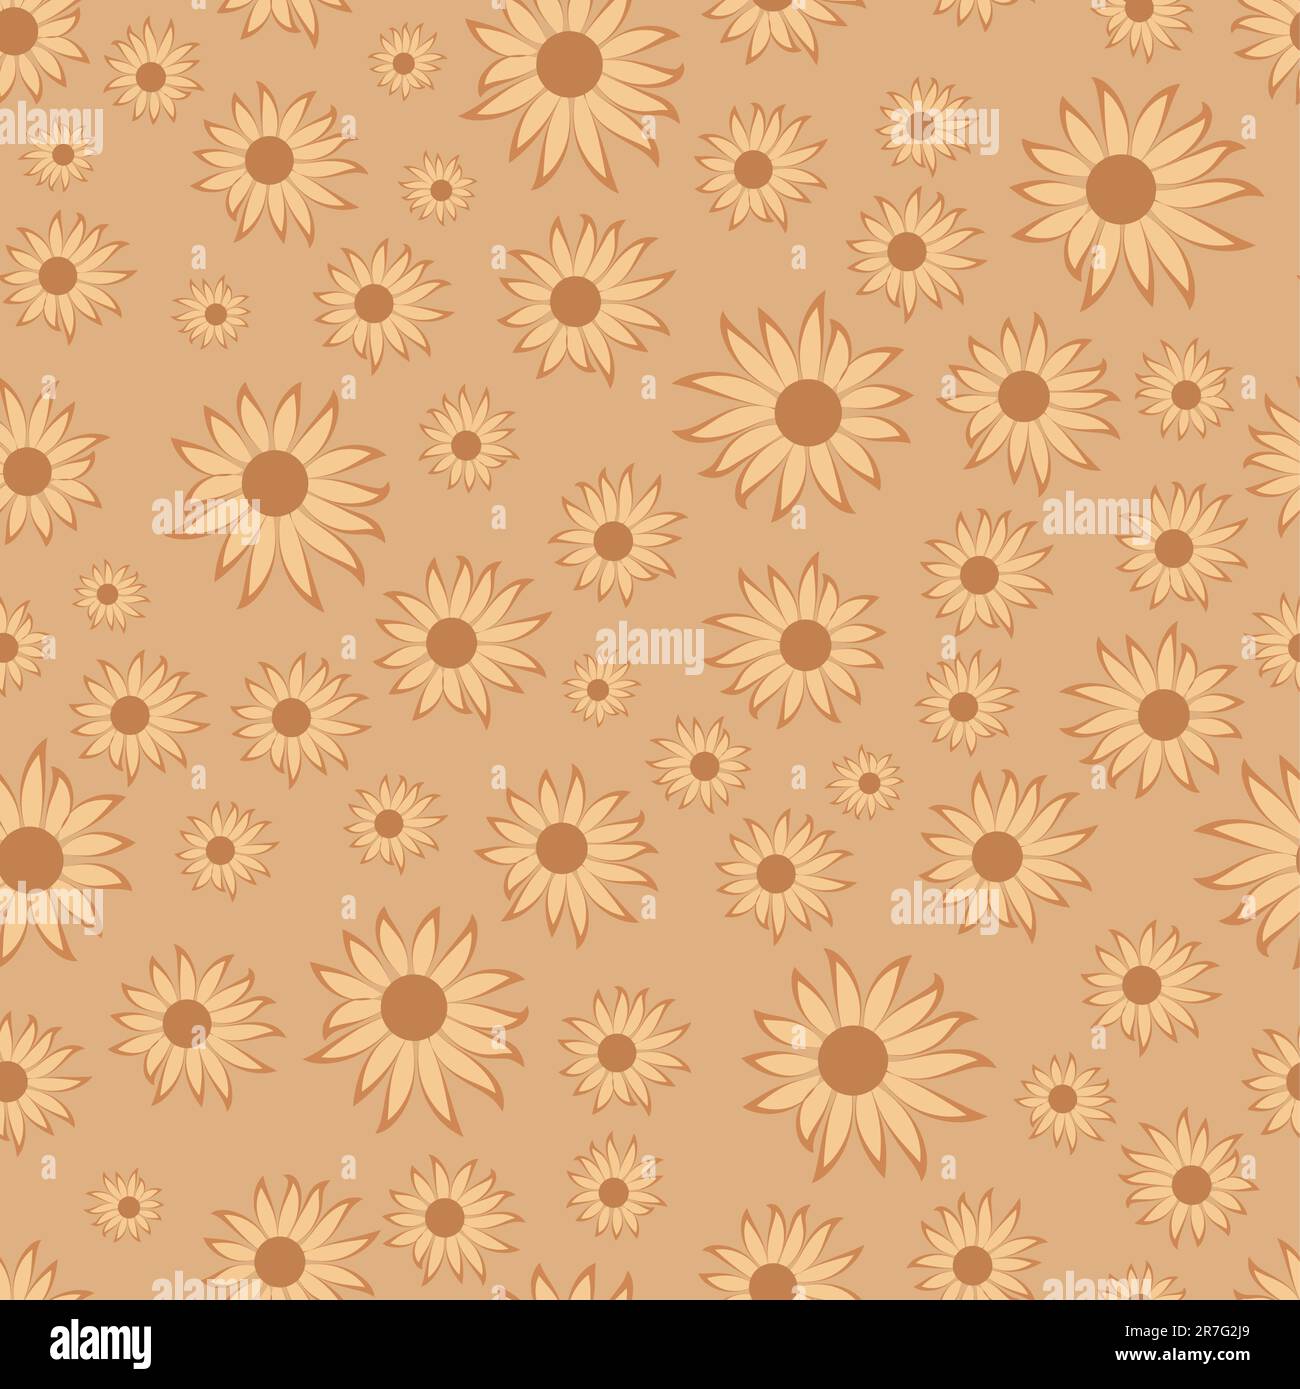 seamless pattern with flowers,vector illustration Stock Vector